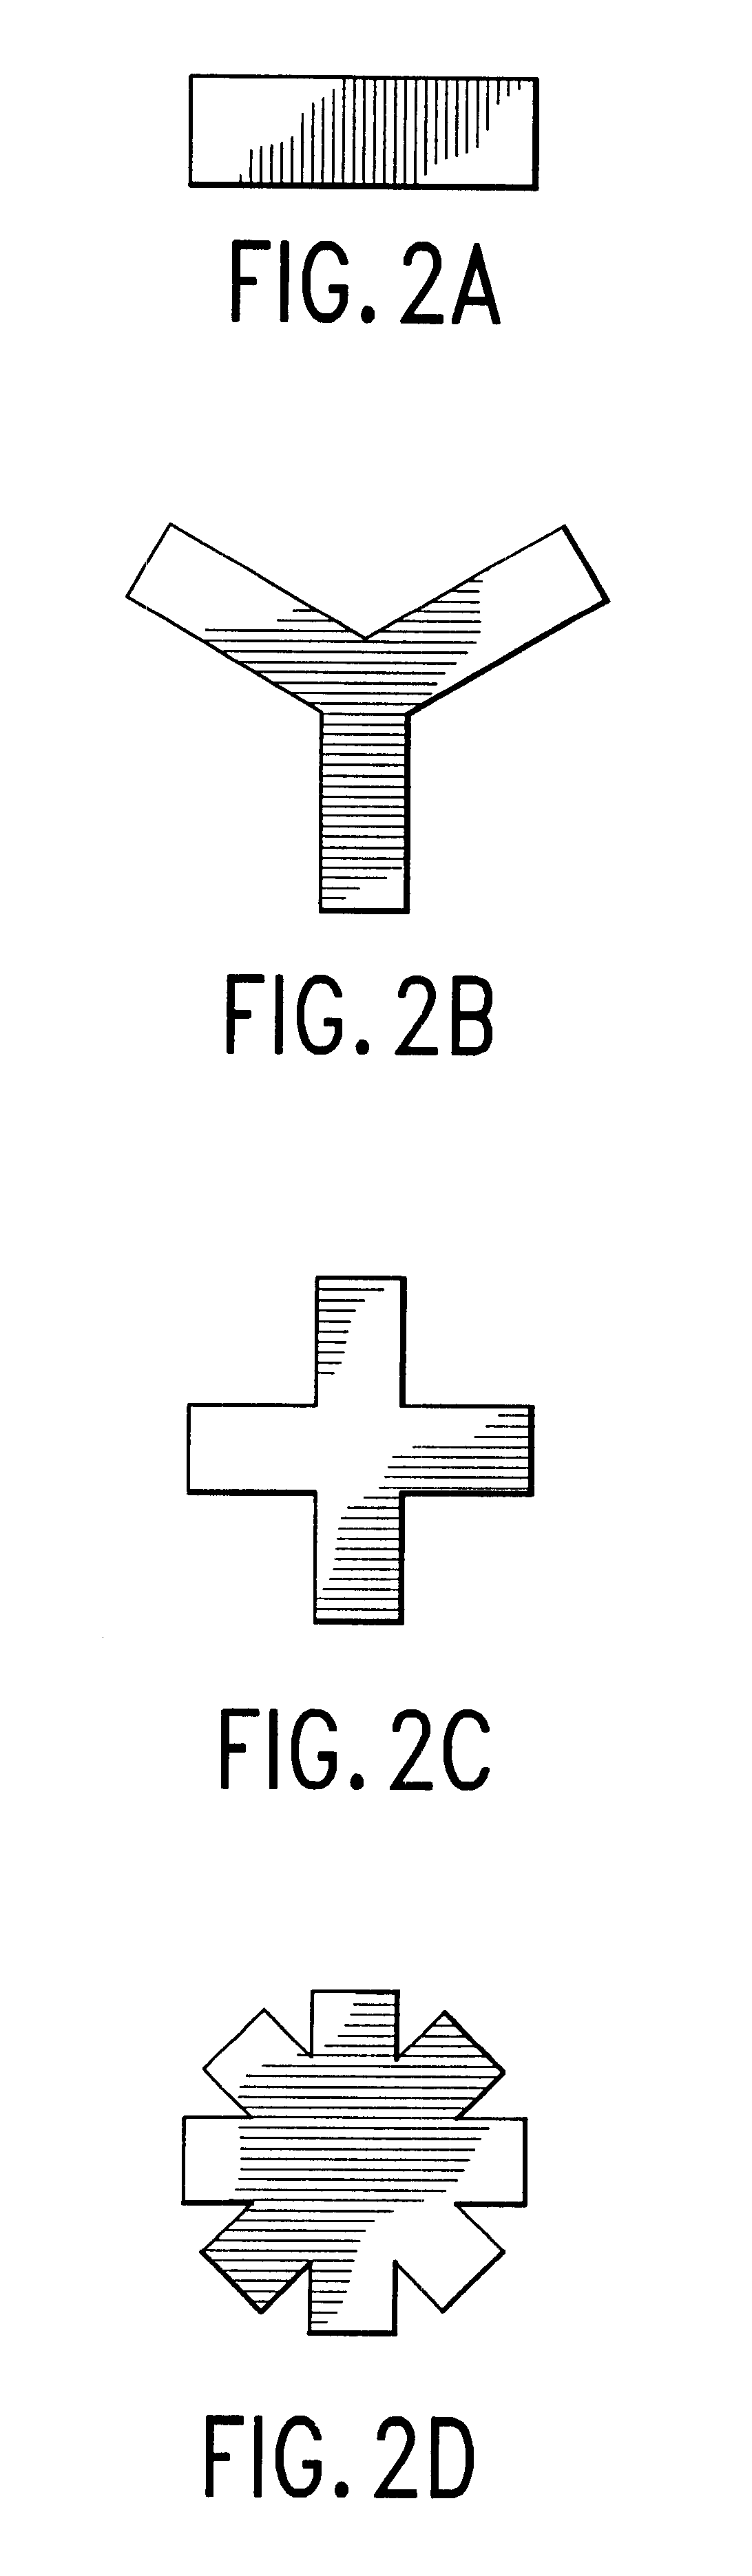 Process for producing regenerated cellulosic fibers